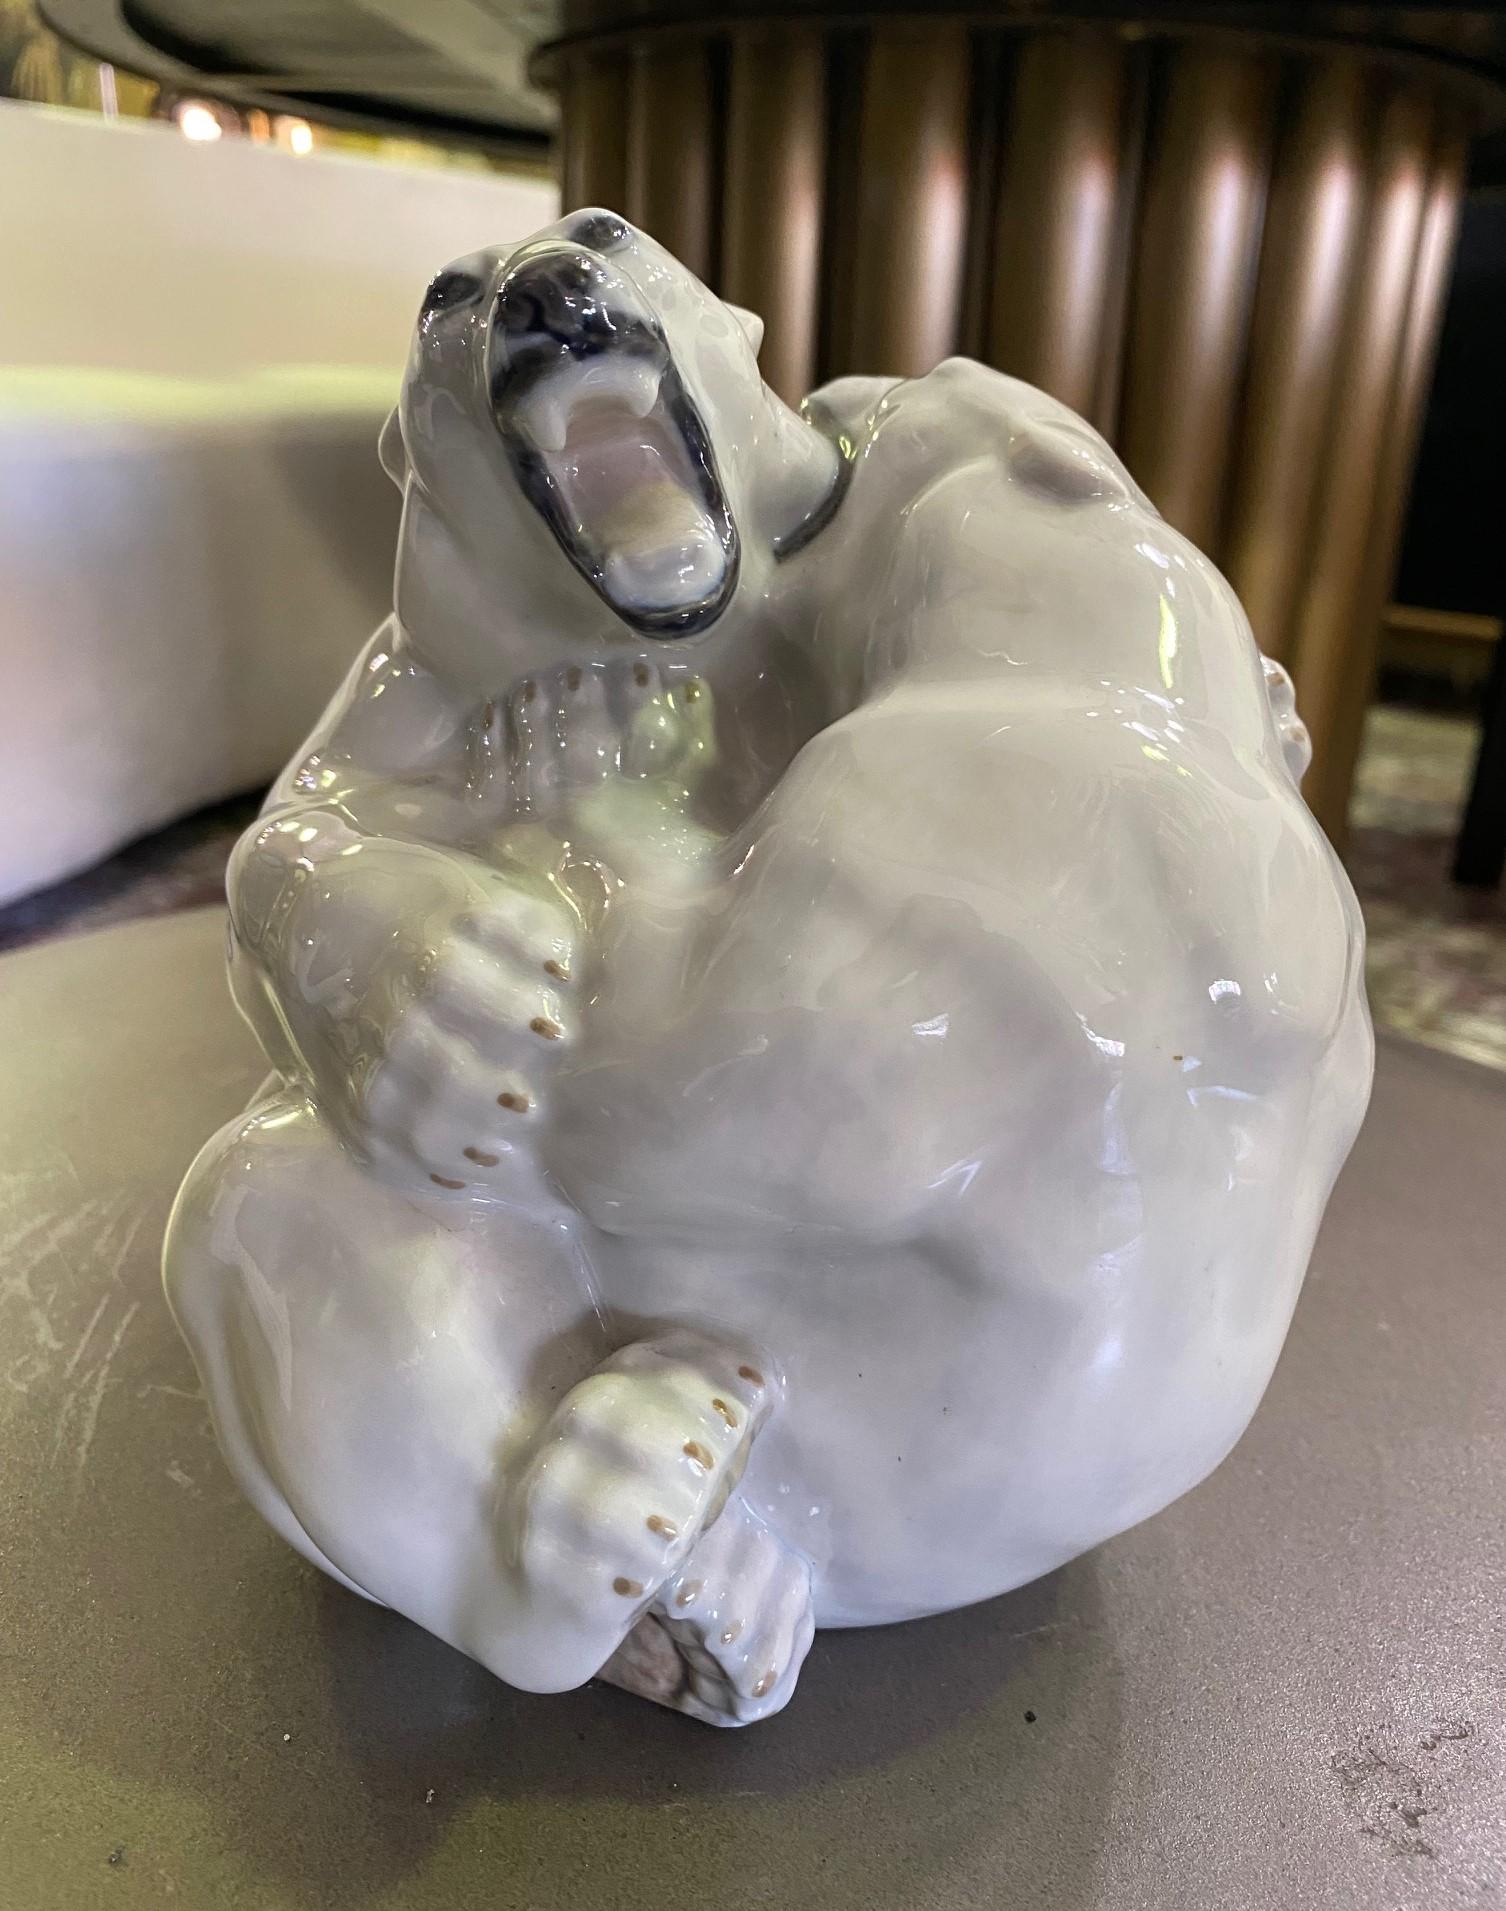 A wonderfully designed and colored figurine of two playful fighting/wresting polar bears by Danish Royal Copenhagen. 

Stamped, numbered (2317), and signed (